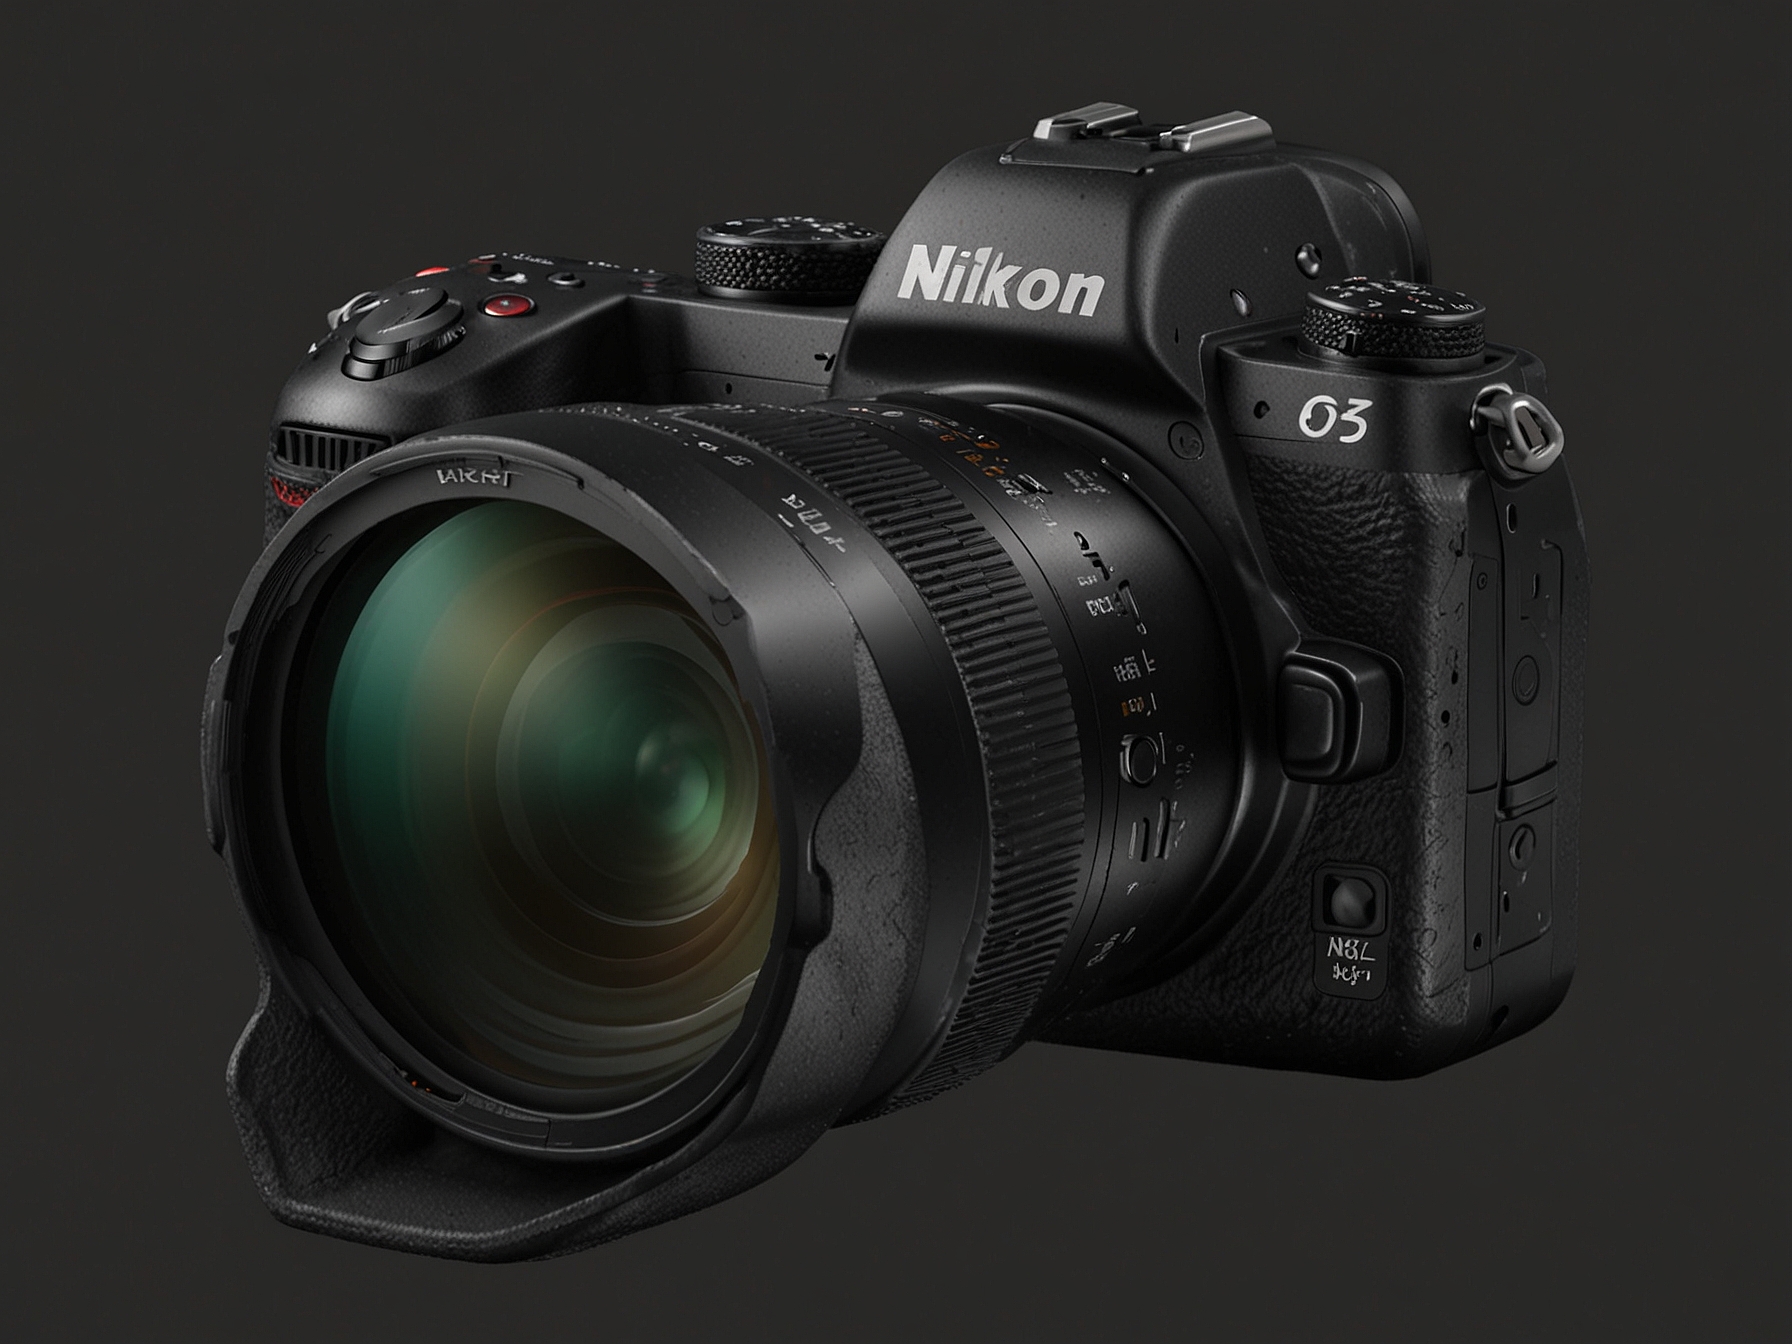 The Nikon Z6 III camera with its innovative partially stacked CMOS sensor, showcasing its compact yet robust design, featuring a comfortable grip and intuitive controls.